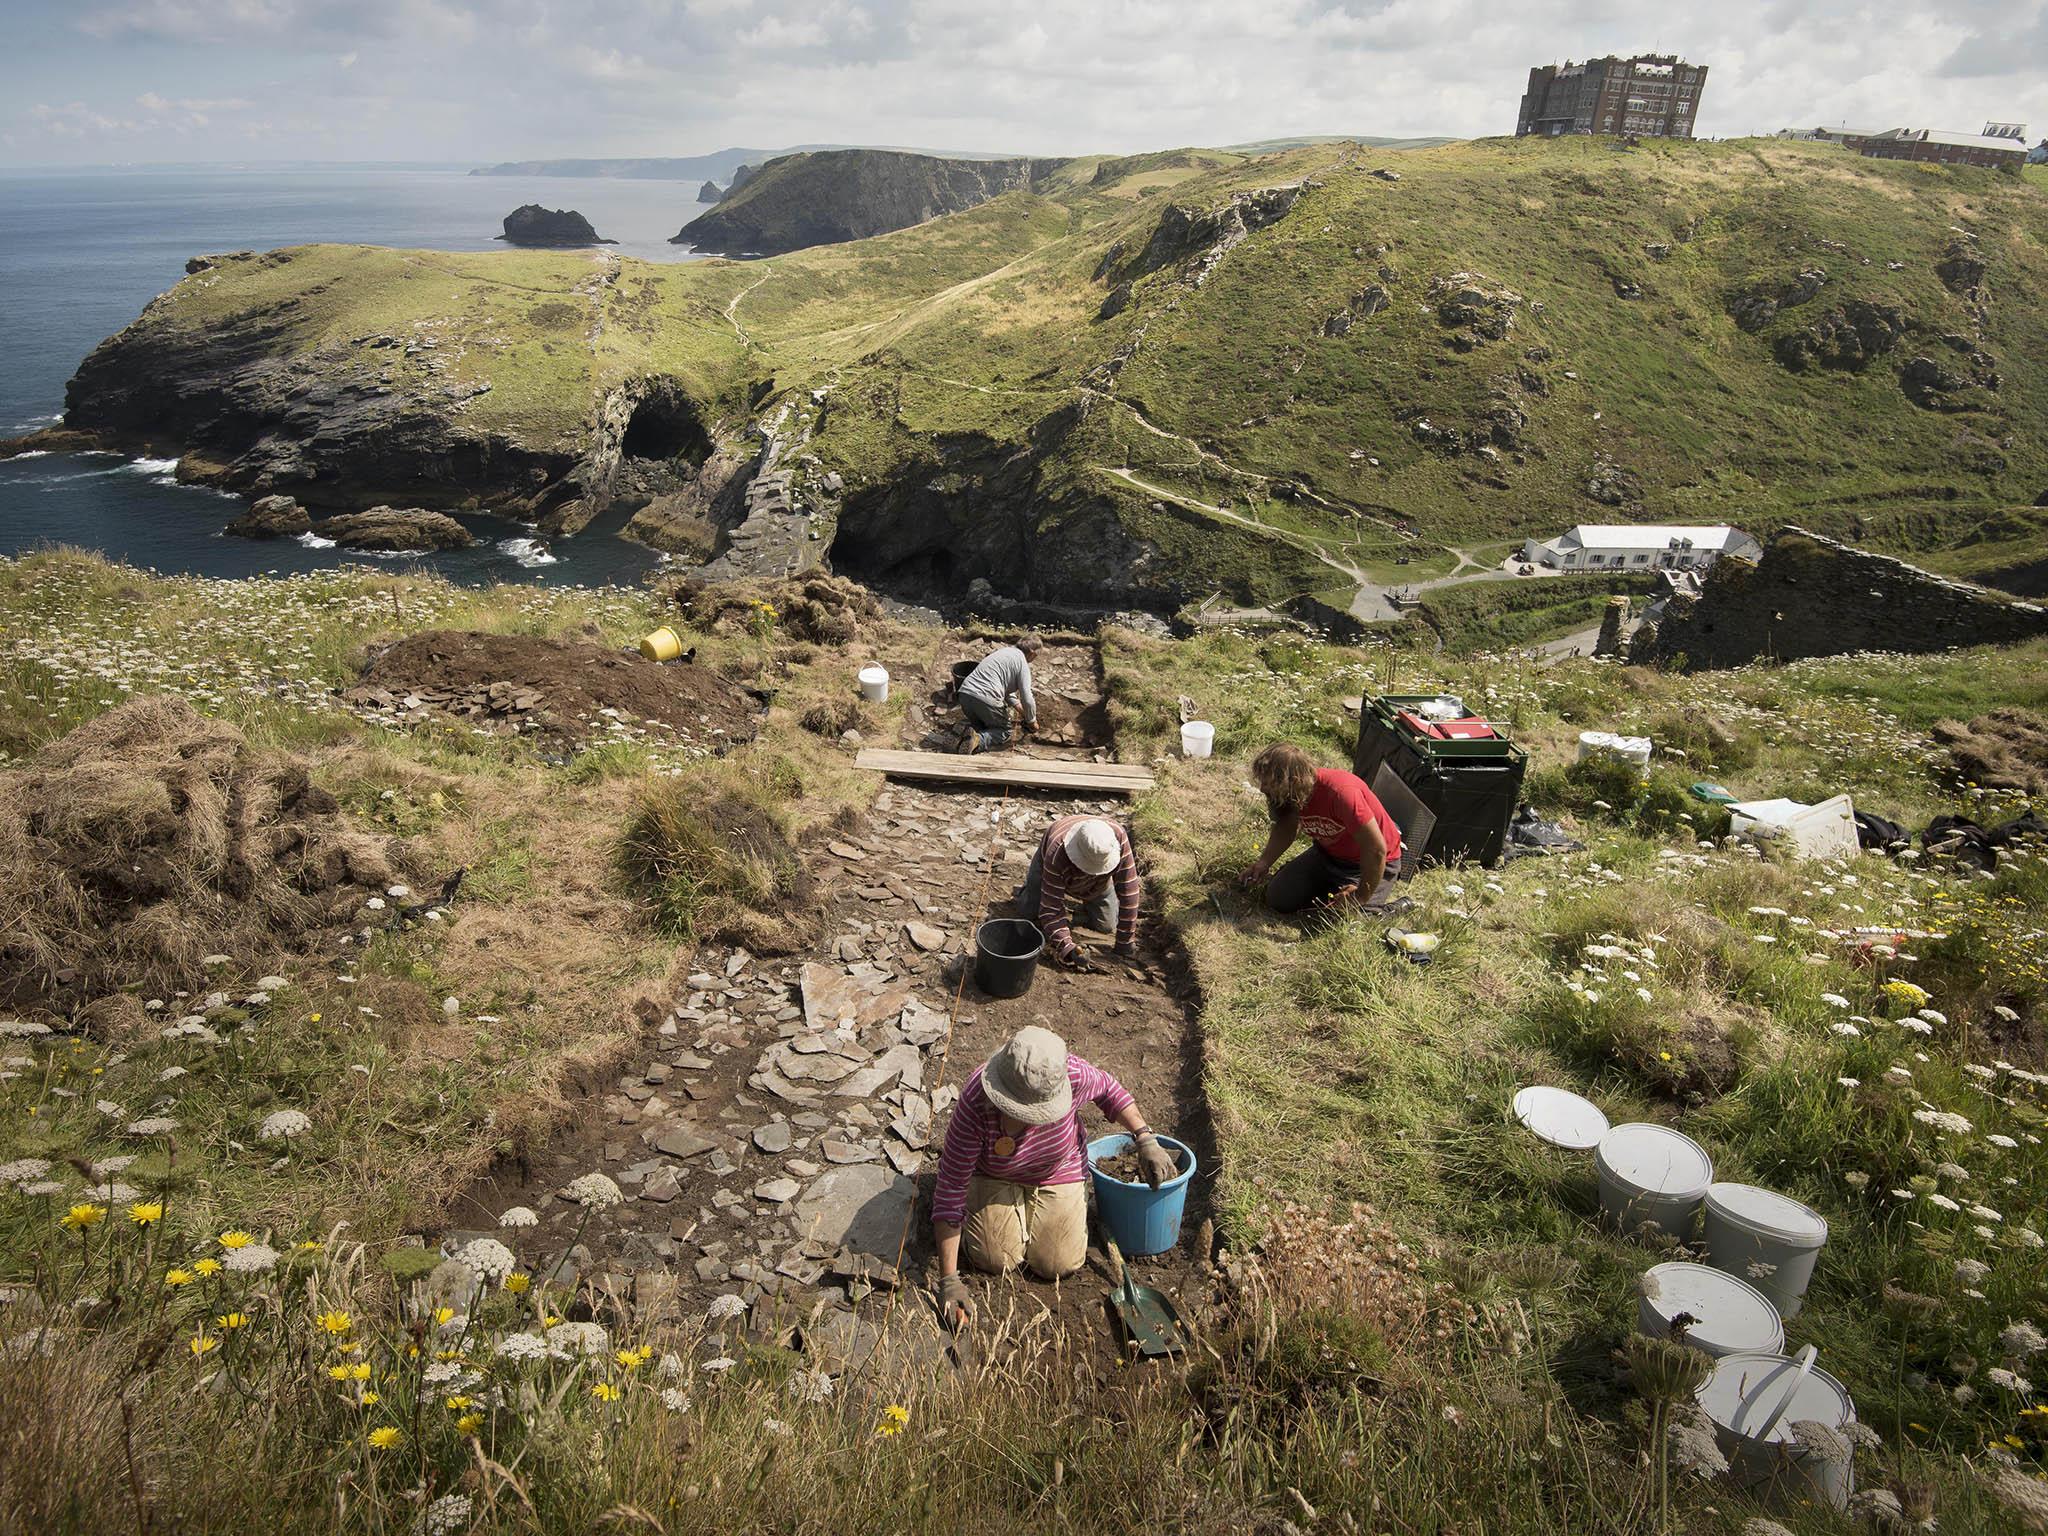 The excavation set out to find more about Tintagel's past which is believed to date back to the 5th and 6th centuries